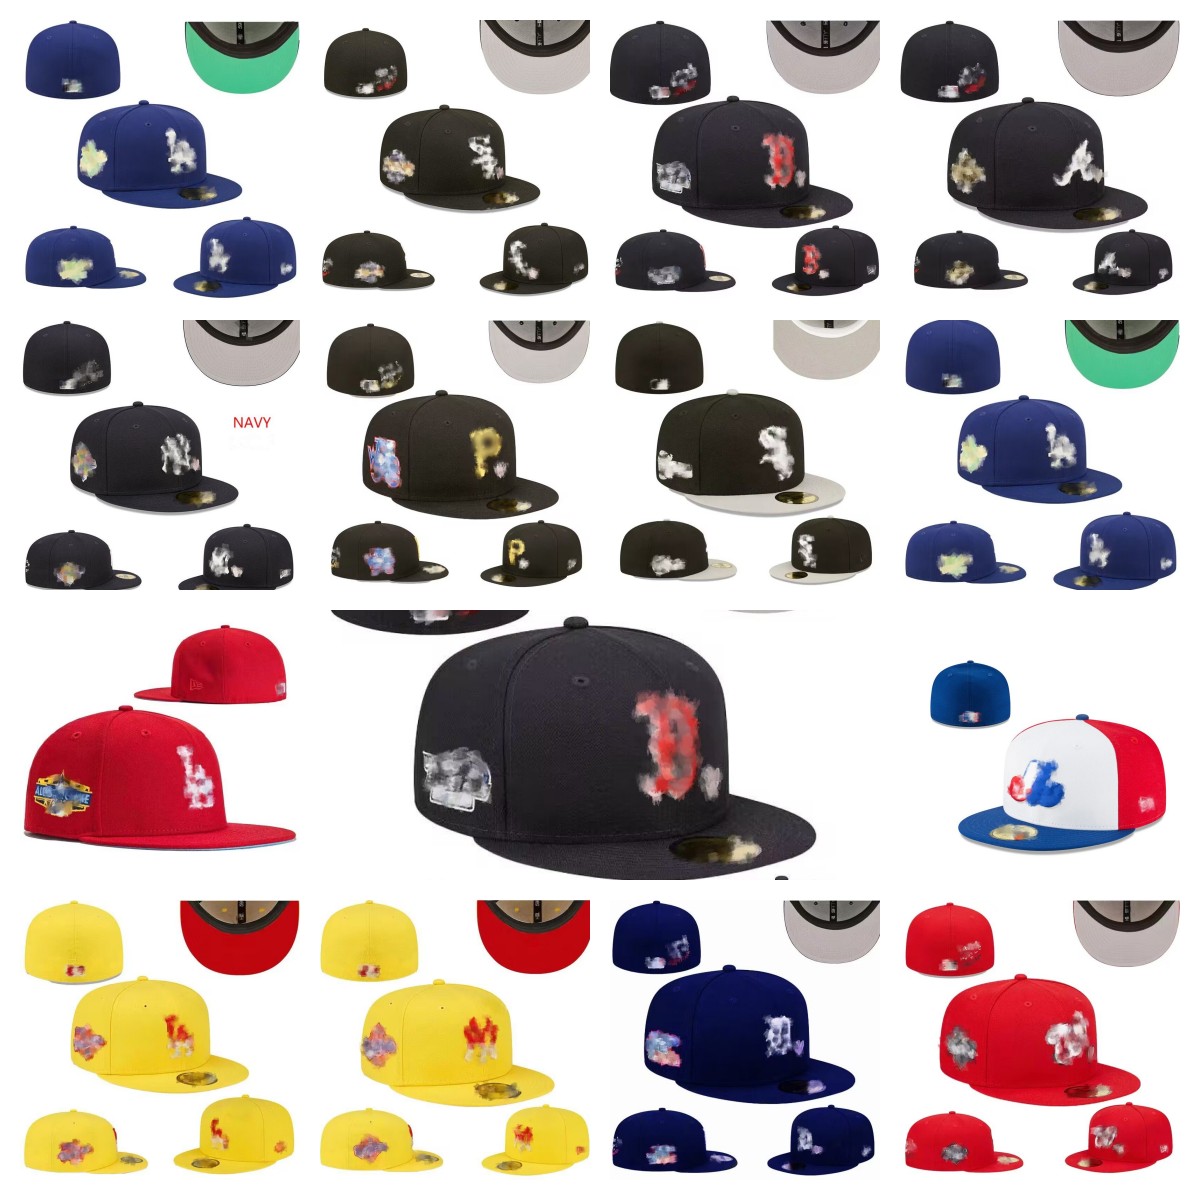 

Luxury Fitted hats Snapbacks hat Adjustable baskball Caps All Team Logo Outdoor Sports chrome heart Embroidery casquette flat Closed Beanies hat flex cap sizes 7-8